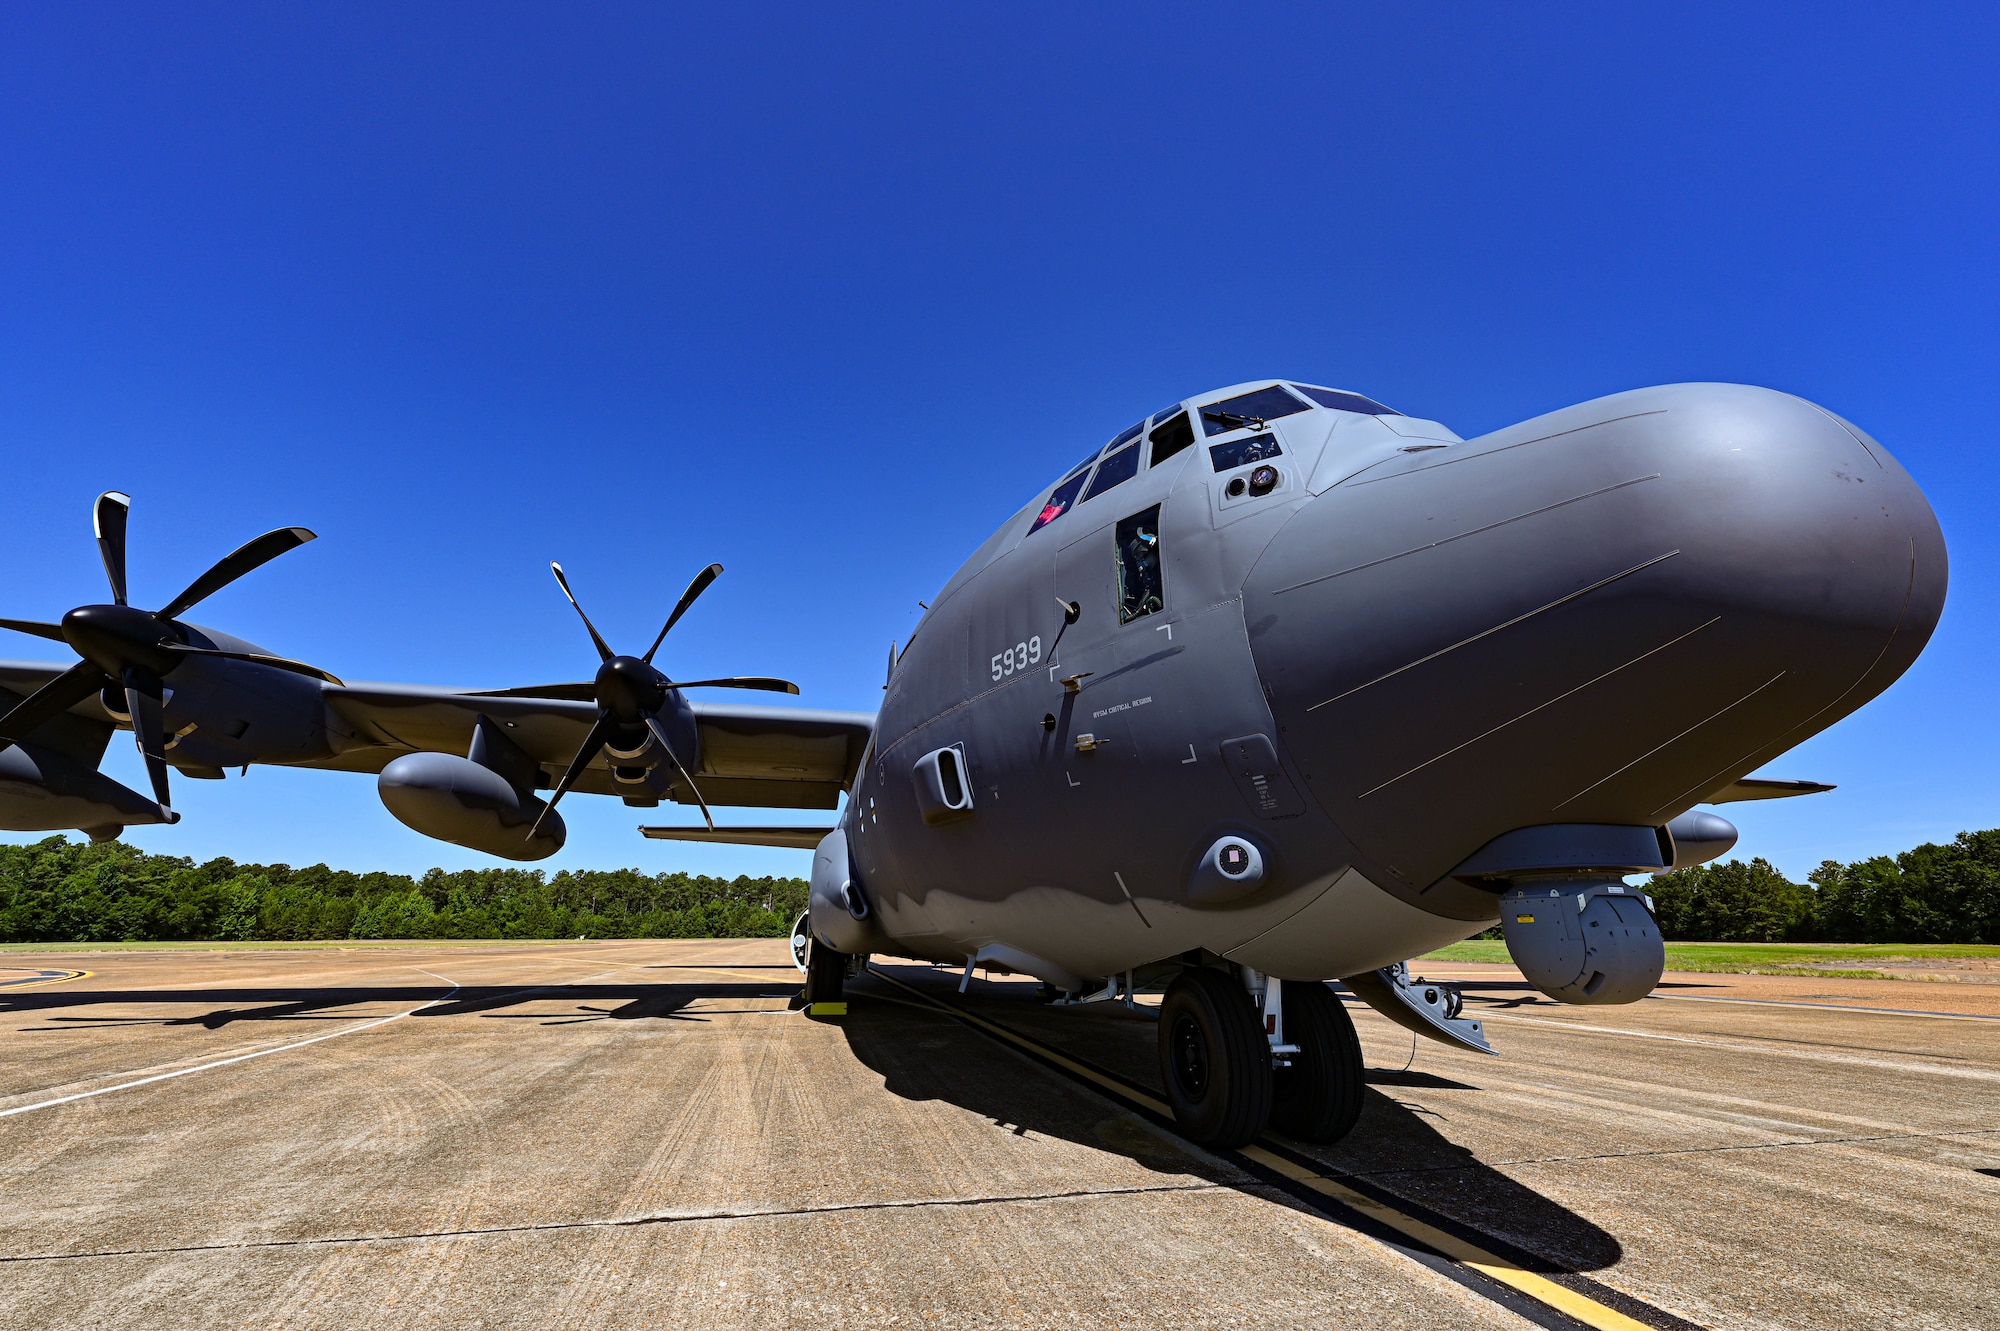 An MC-130J Commando II sits on the flightline, June 24, 2022, at Columbus Air Force Base, Miss. Pilots representing the AC-130J Ghostrider, U-28A Draco, C-146A Wolfhound, and MC-130J visited Columbus AFB to talk with students about the Air Force Special Operations Command and their mission.